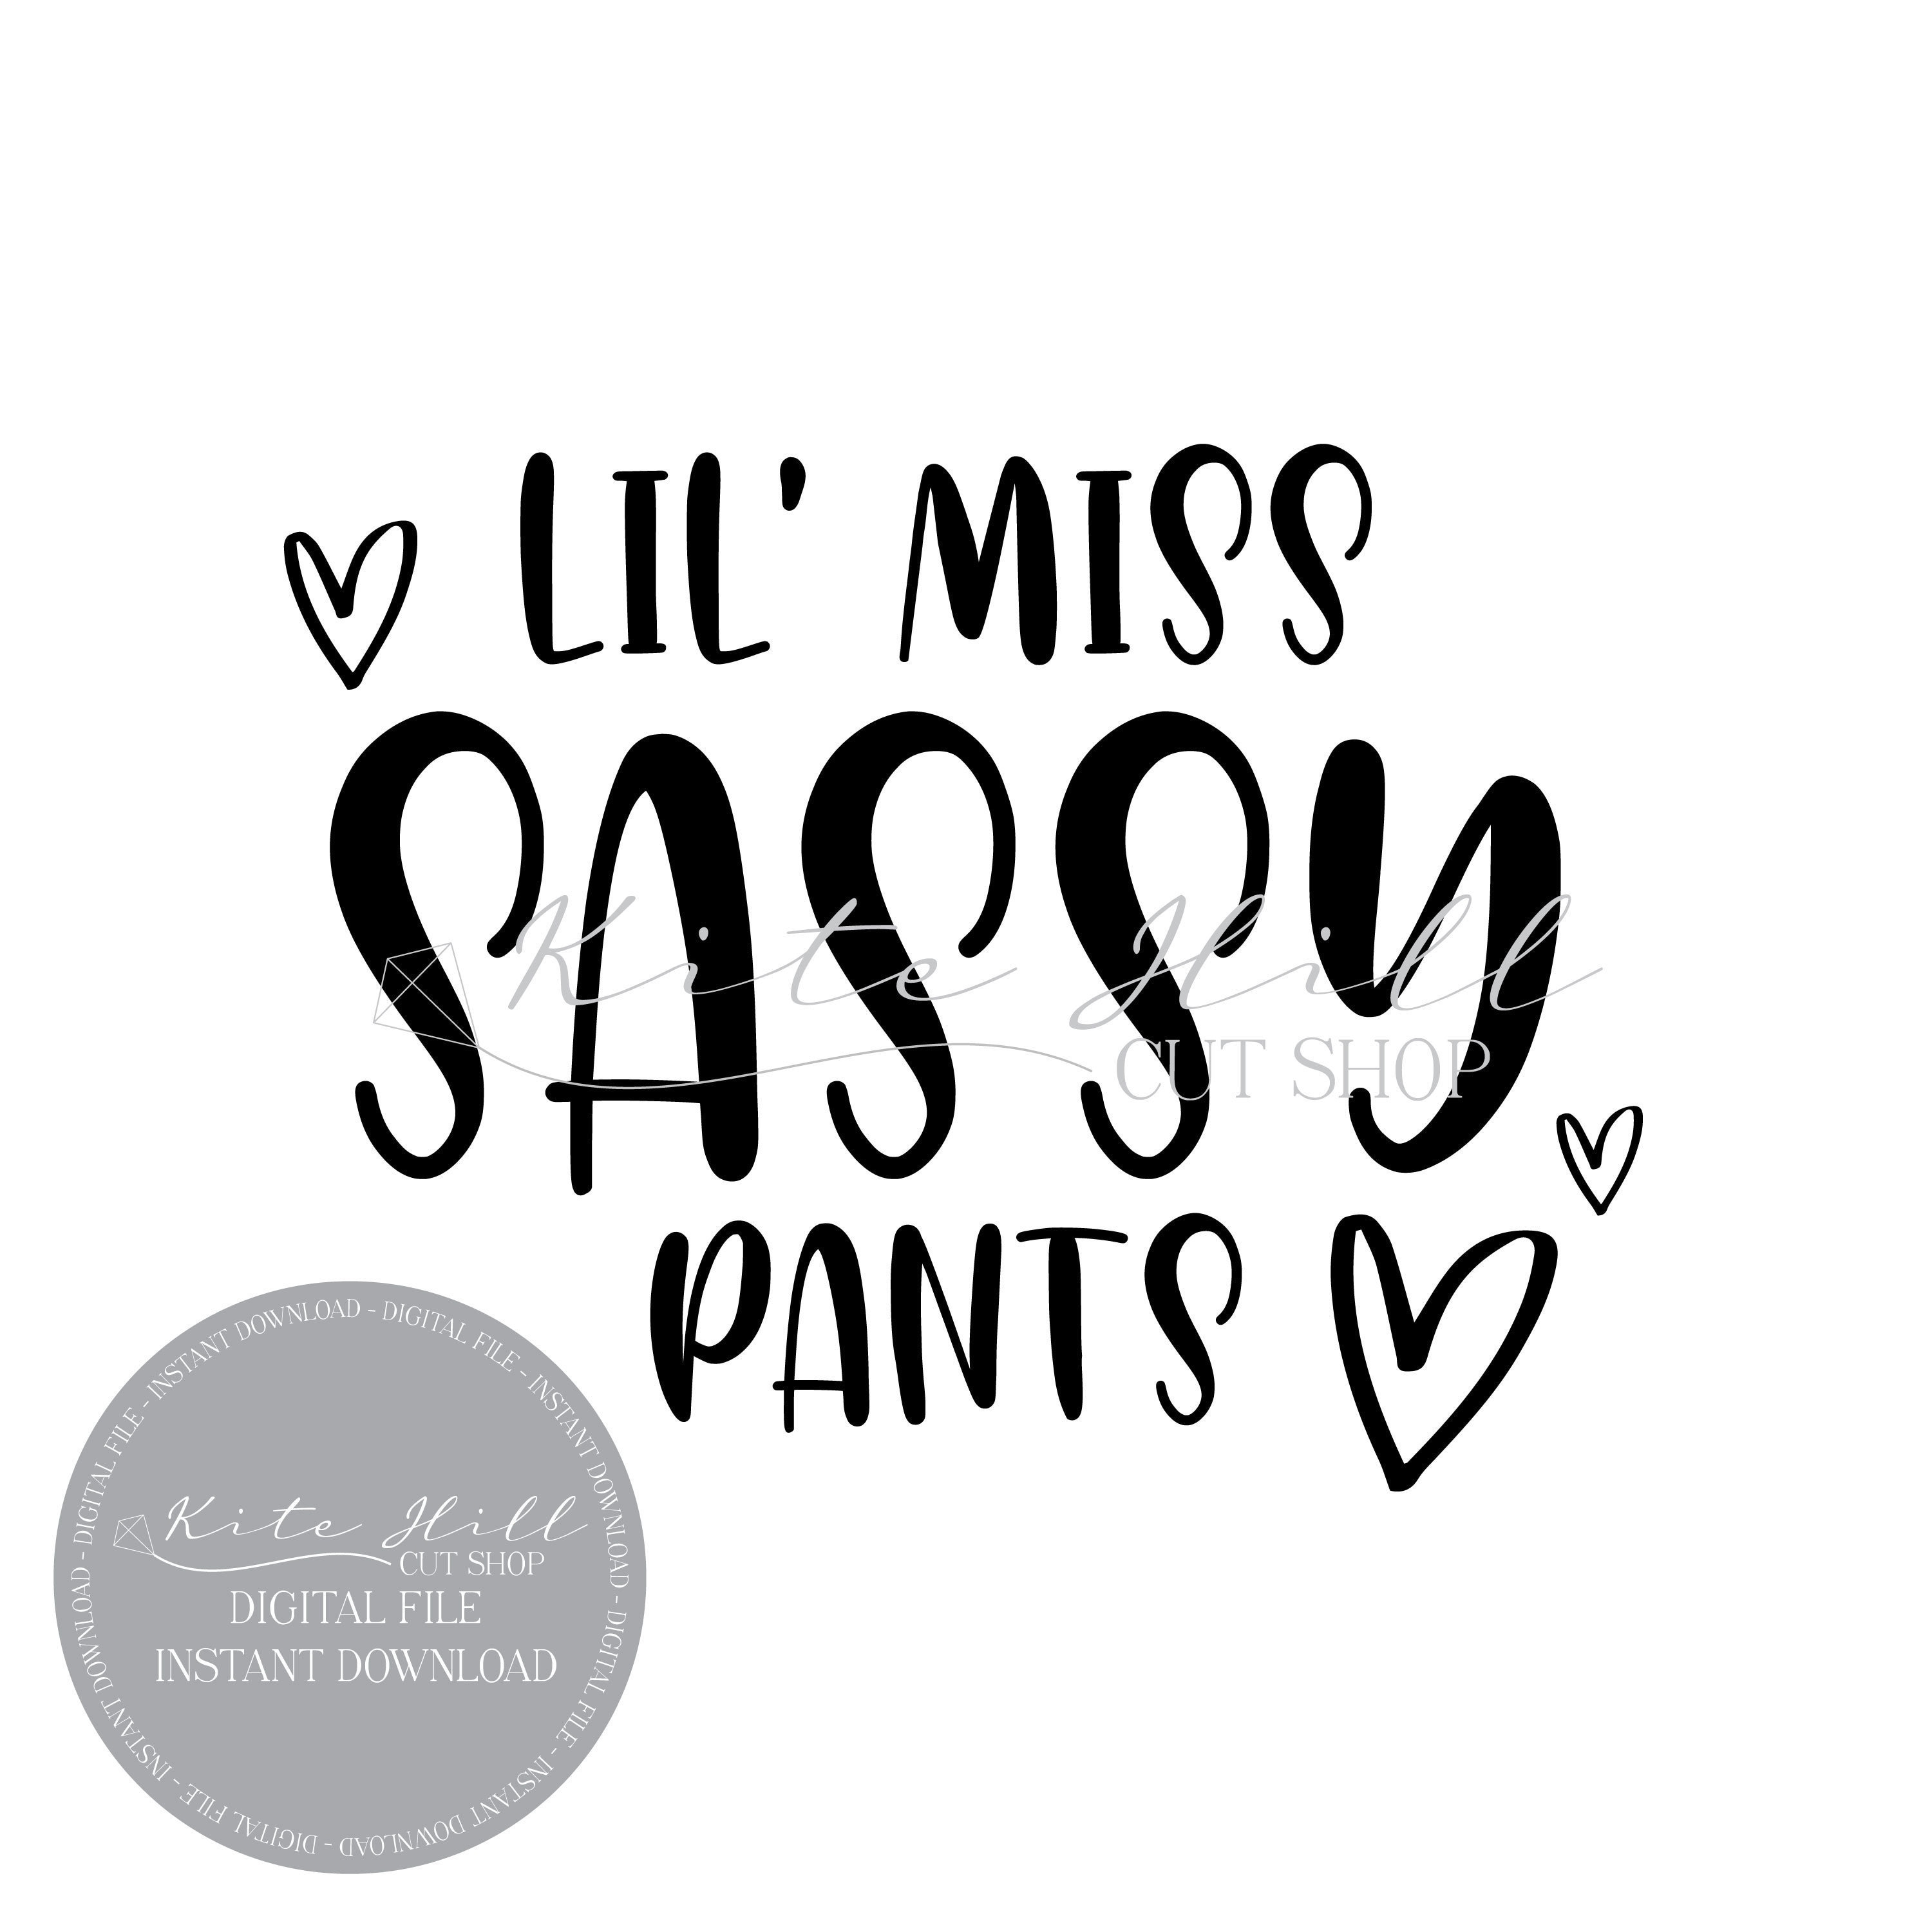 Little Miss Sassy Pants SVG Cut File Commercial Use Instant